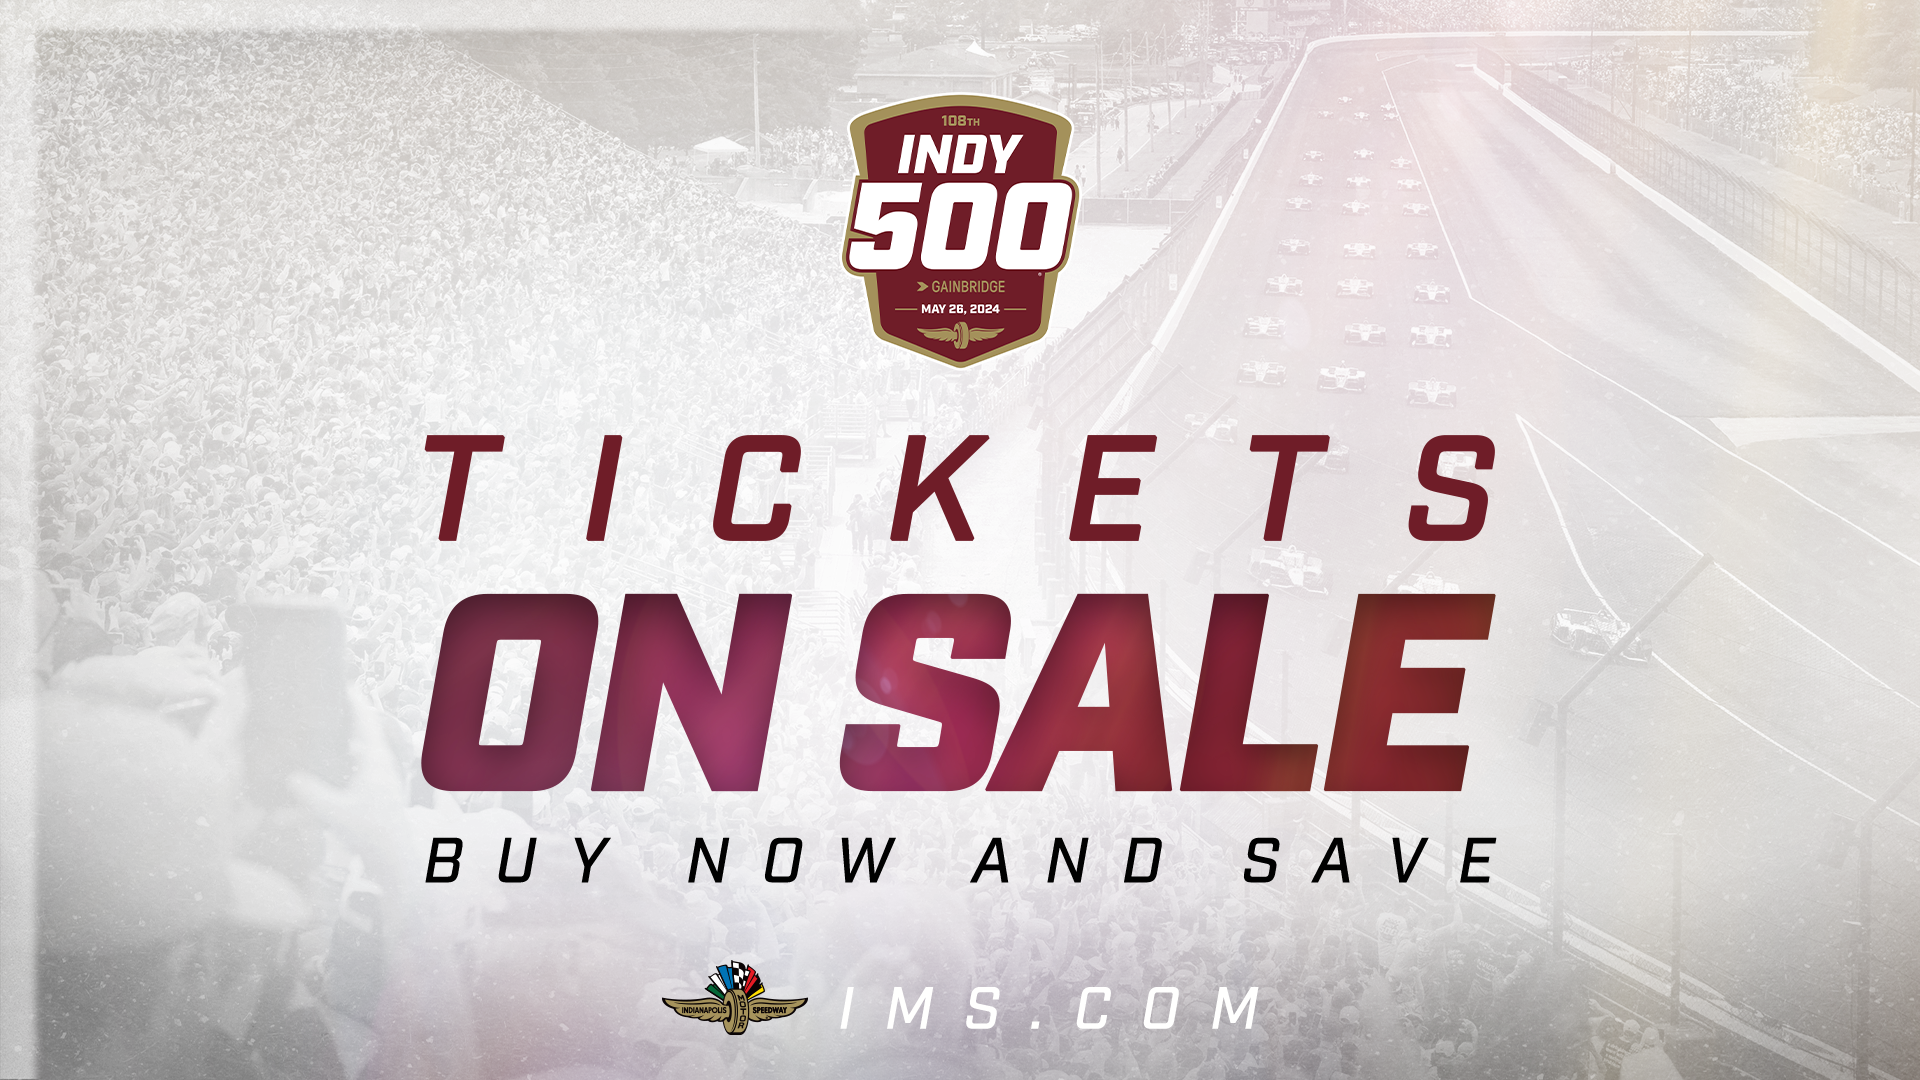 I500 Tickets On Sale